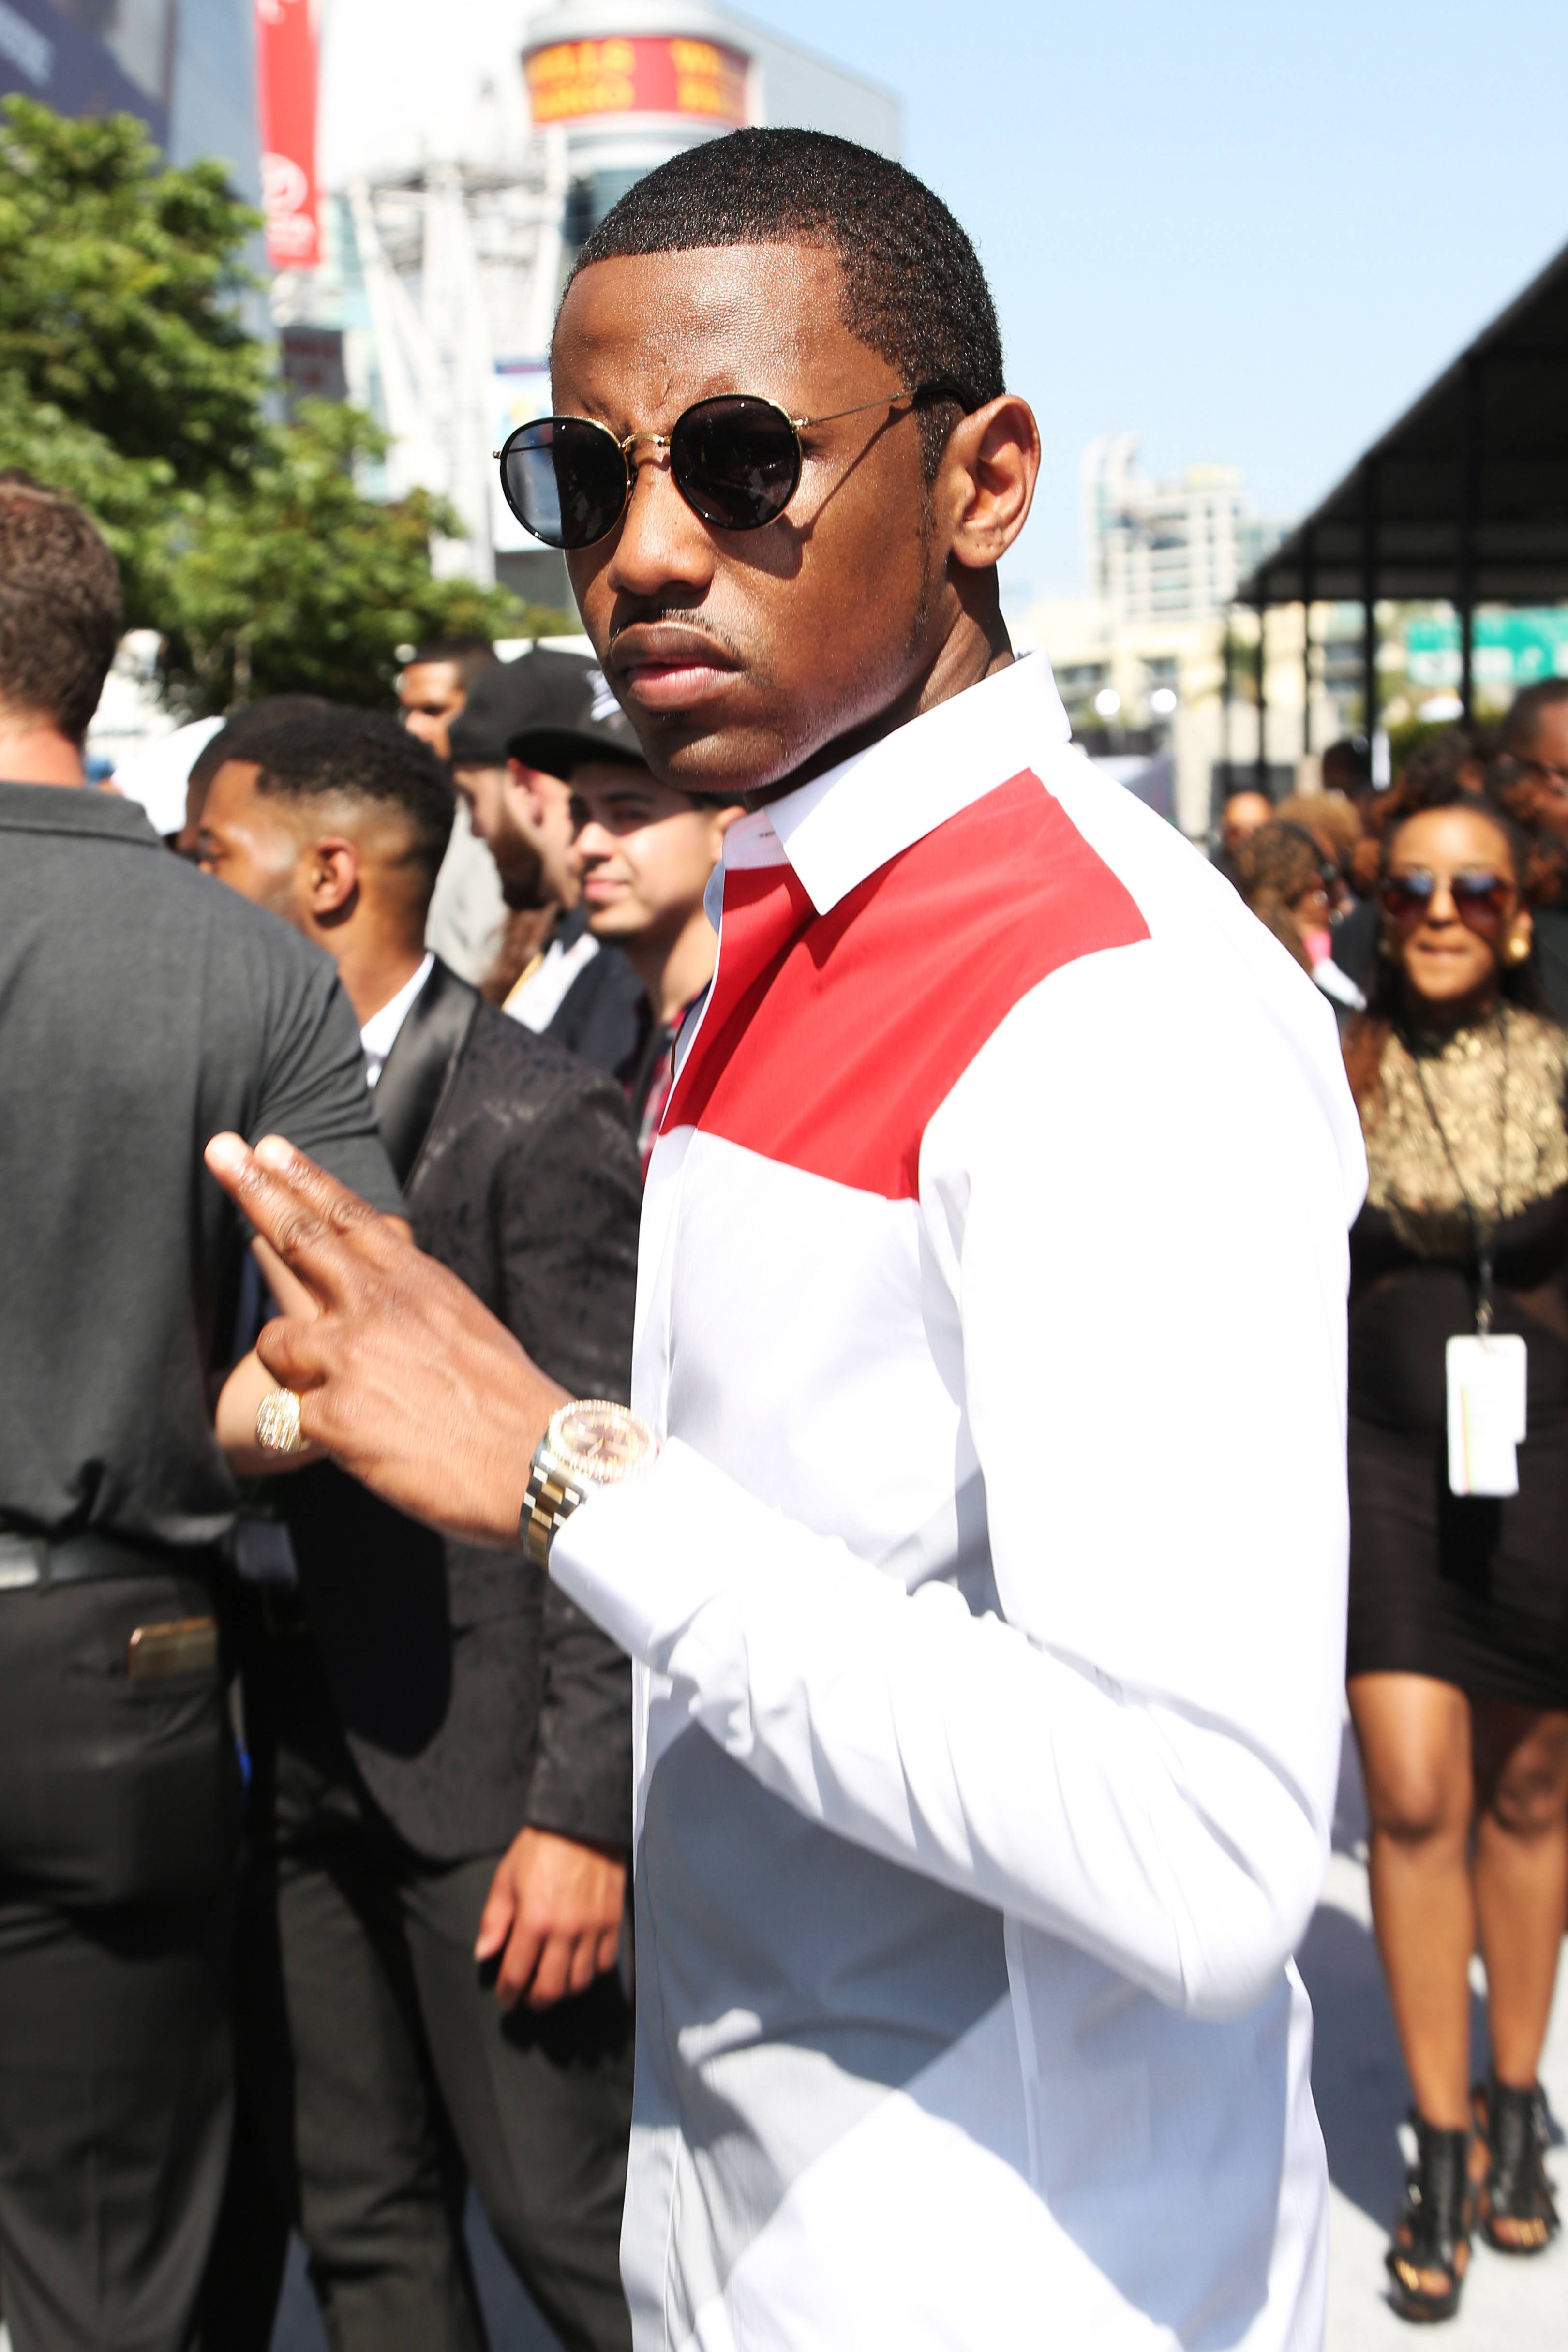 Fabolous The rapper Image 31 from Red Carpet Rundown The 2016 BET